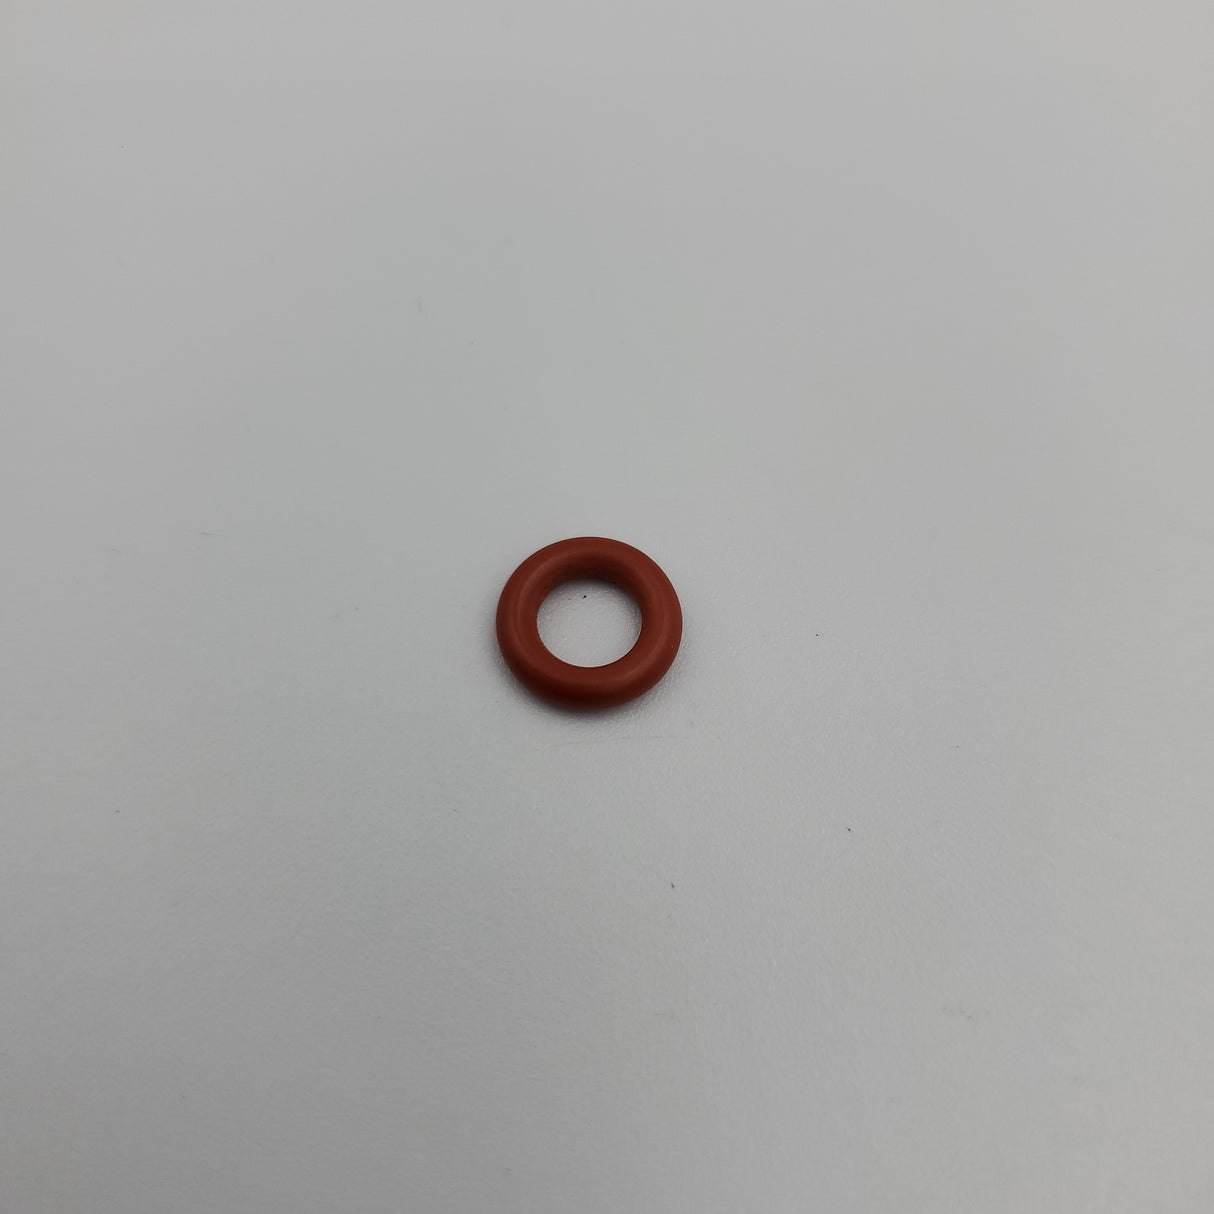 Metric gasket 0050-20 silicone